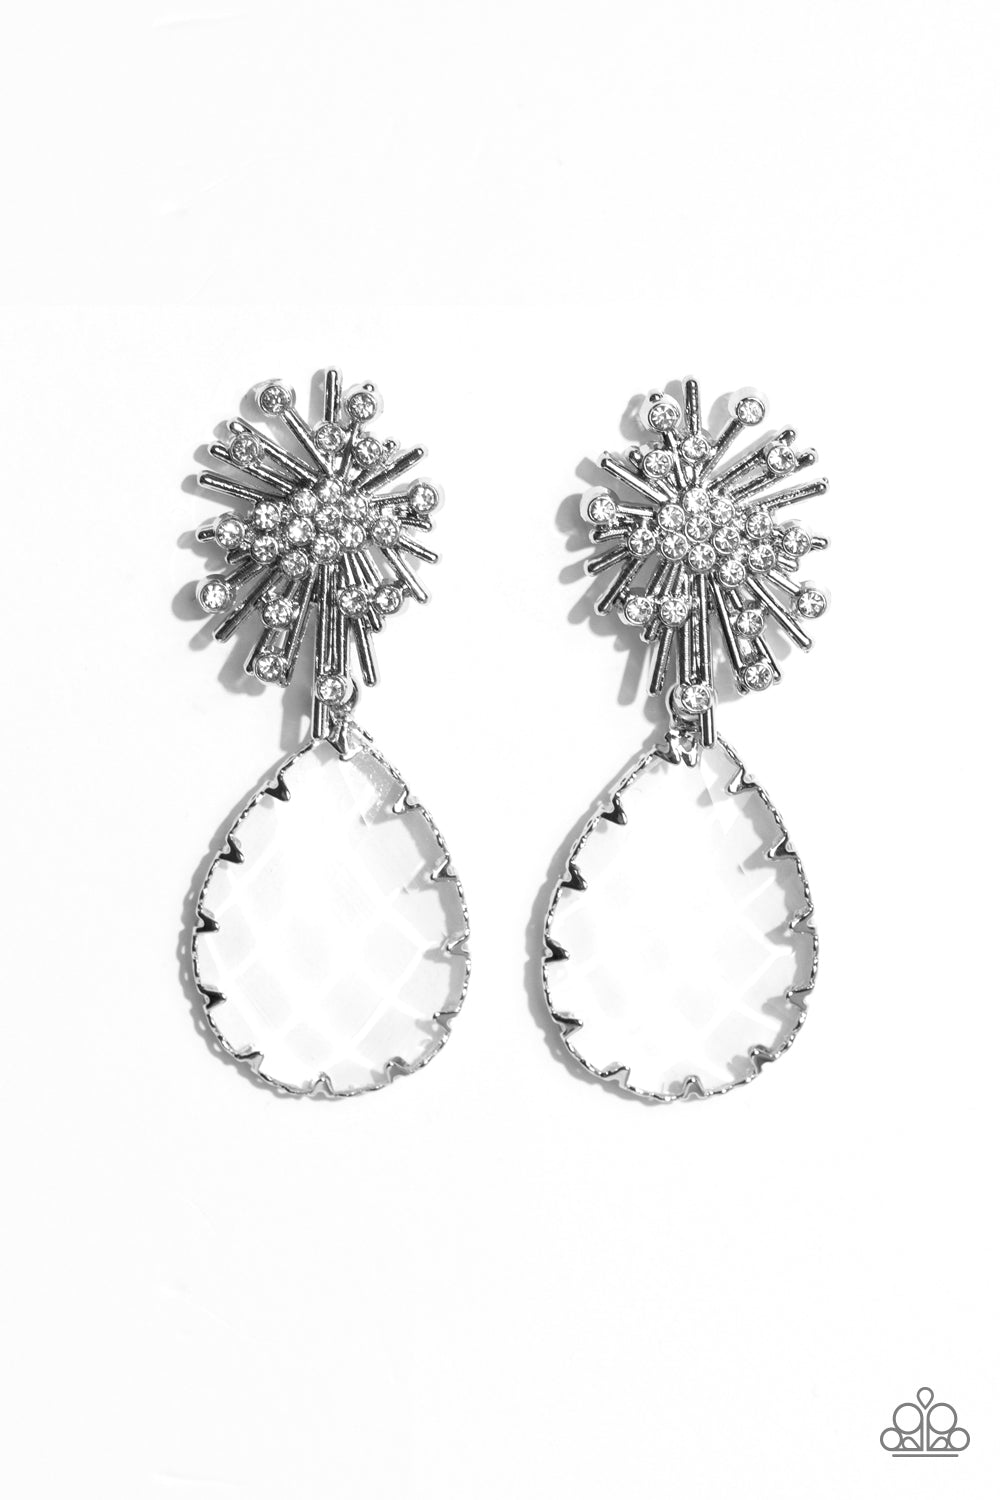 Stellar Shooting Star White Rhinestone and Silver Earrings - Paparazzi Accessories- lightbox - CarasShop.com - $5 Jewelry by Cara Jewels